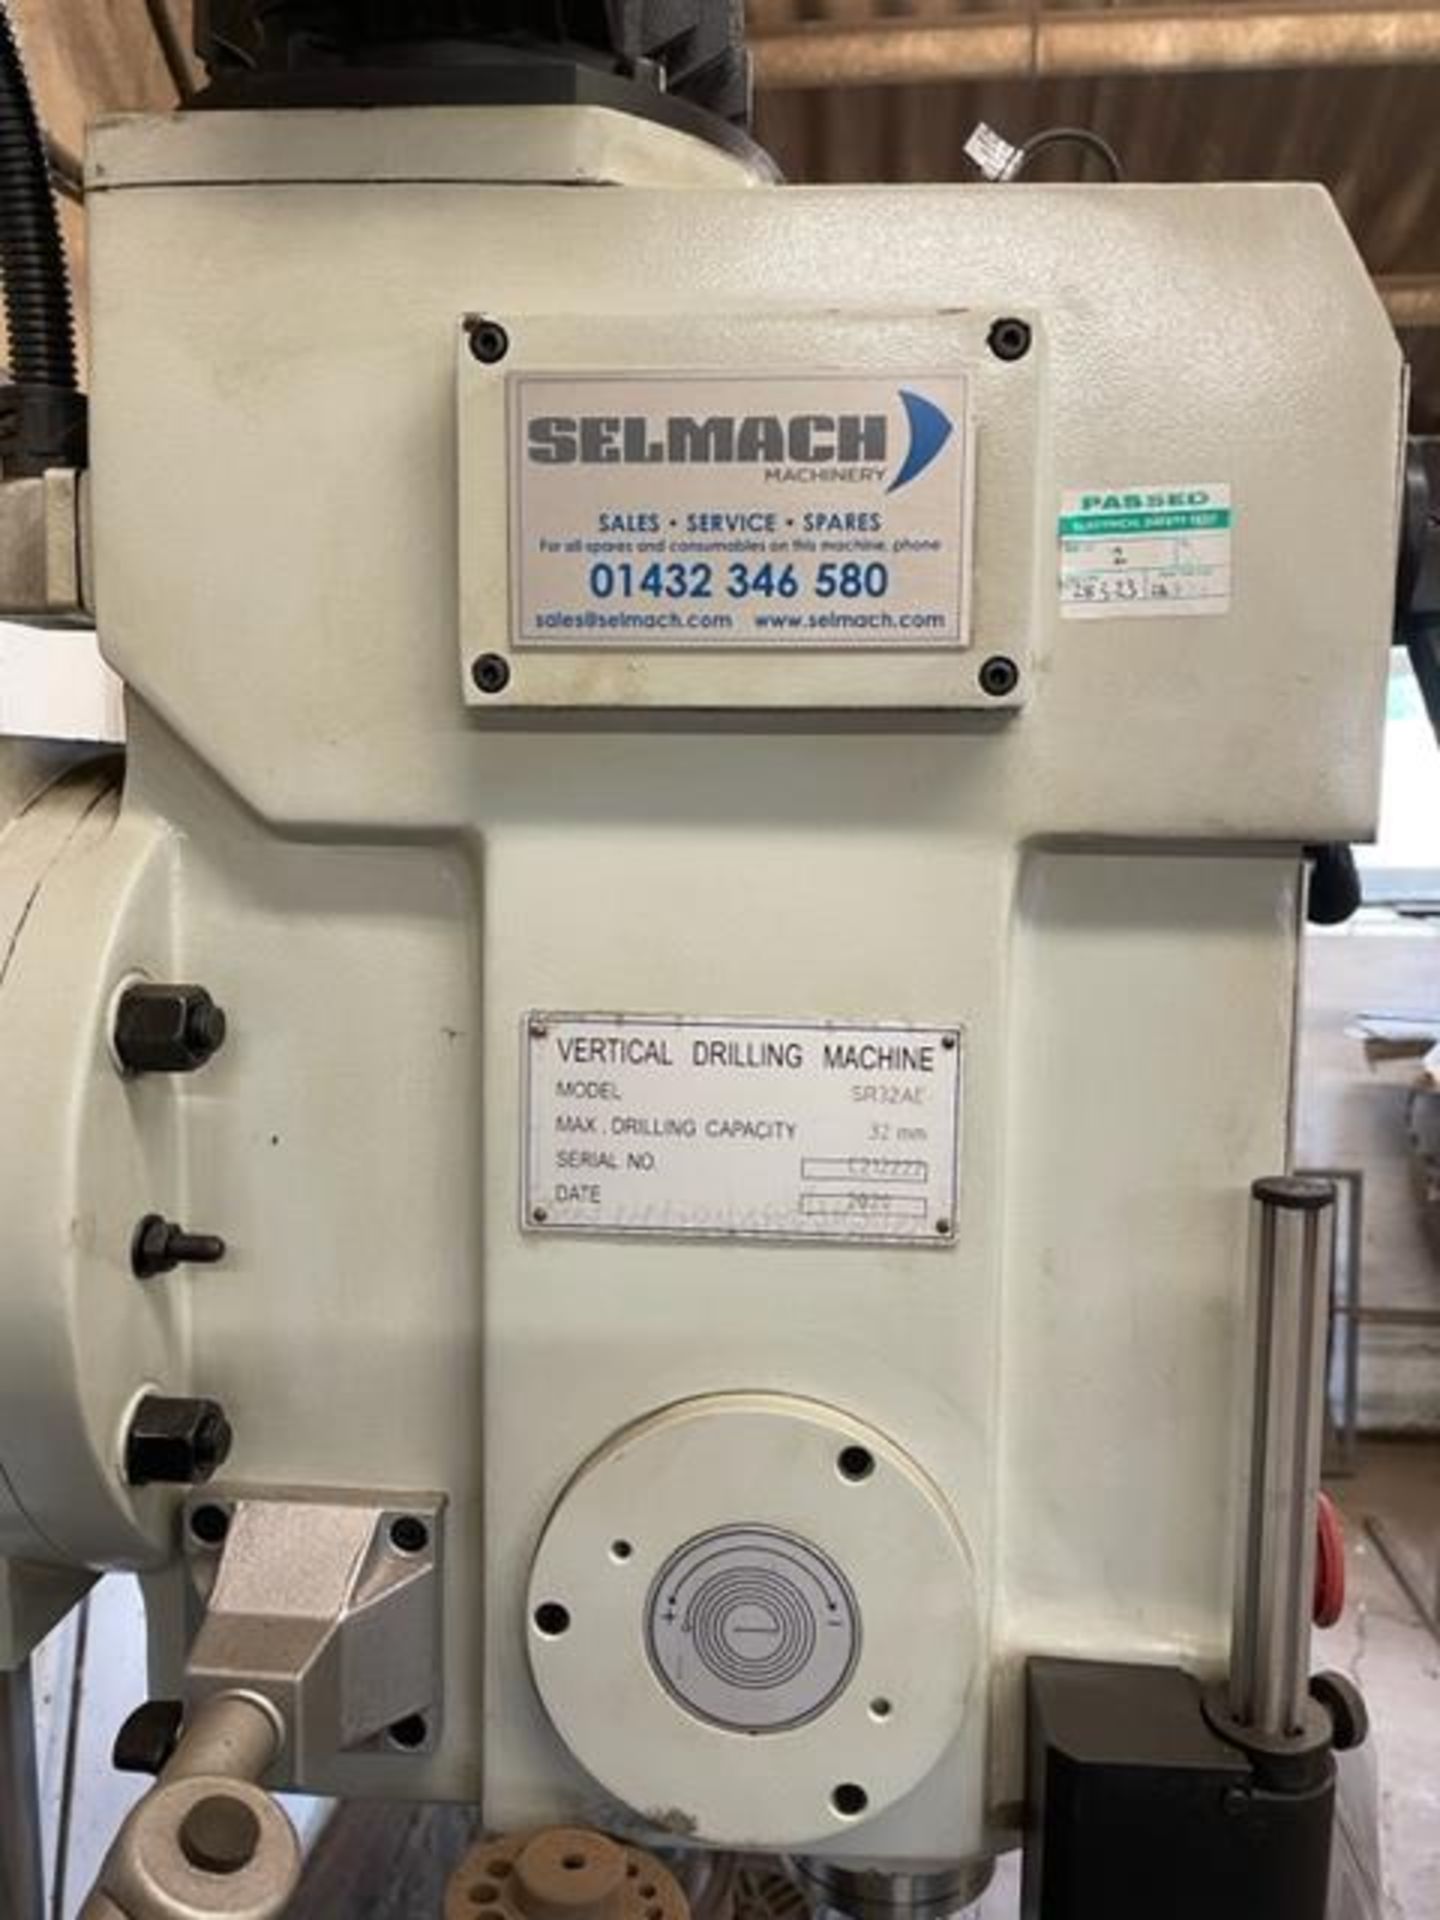 2020 Meyer SR32AE Vertical Drilling Machine 32mm Max Capacity,0 Serial Number C212222 (Location: - Image 2 of 4